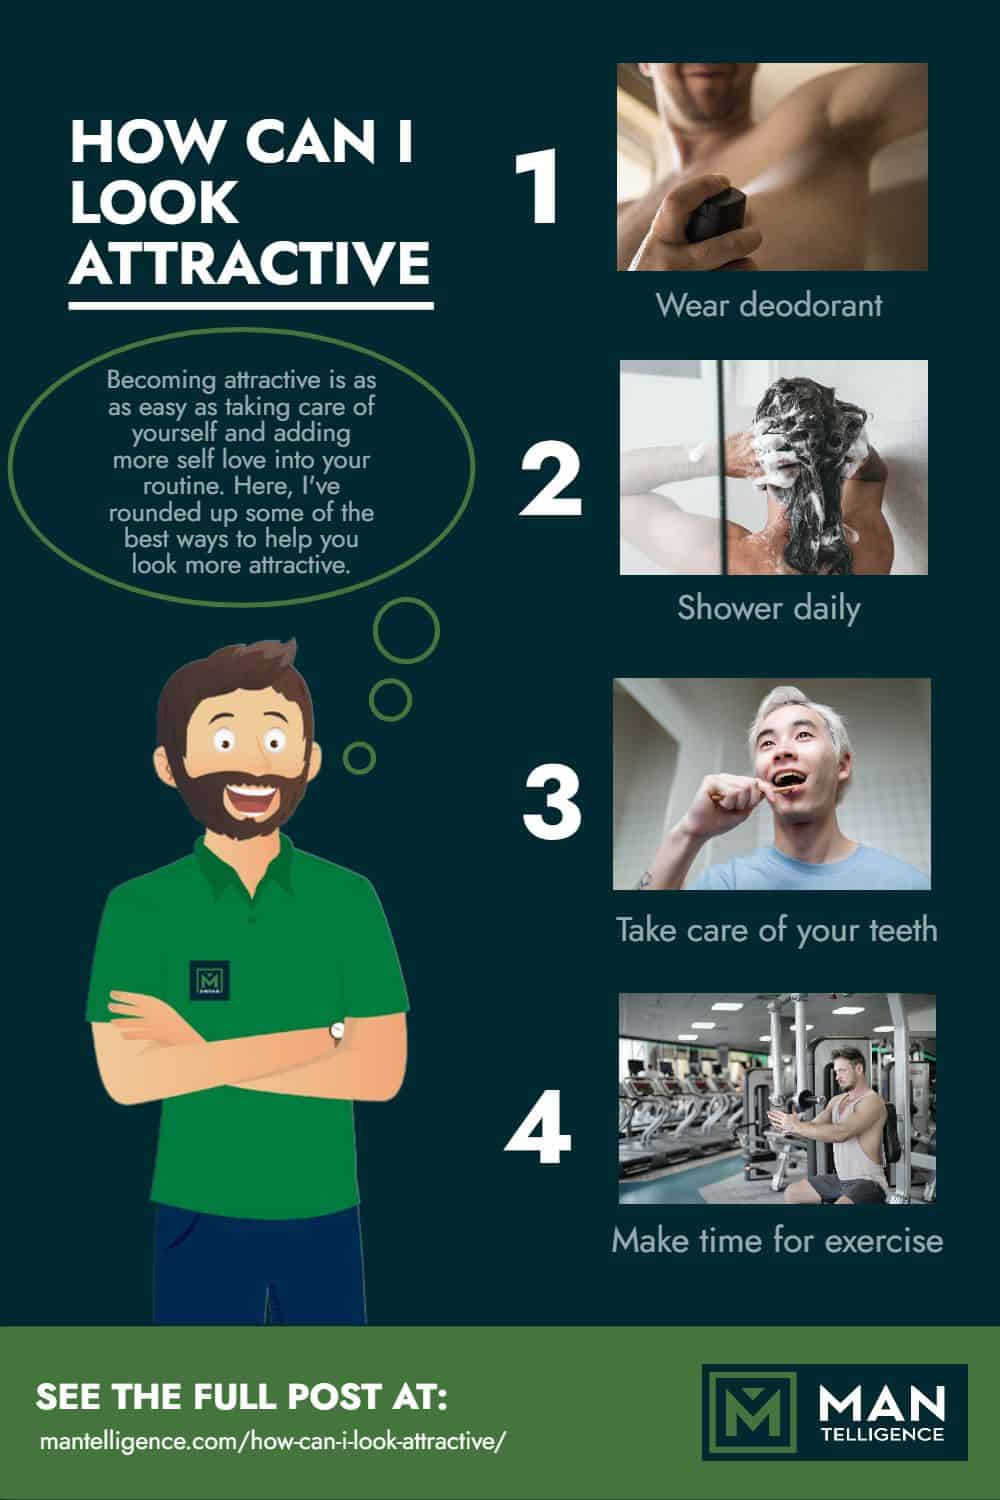 HOW CAN I LOOK ATTRACTIVE - Infographic